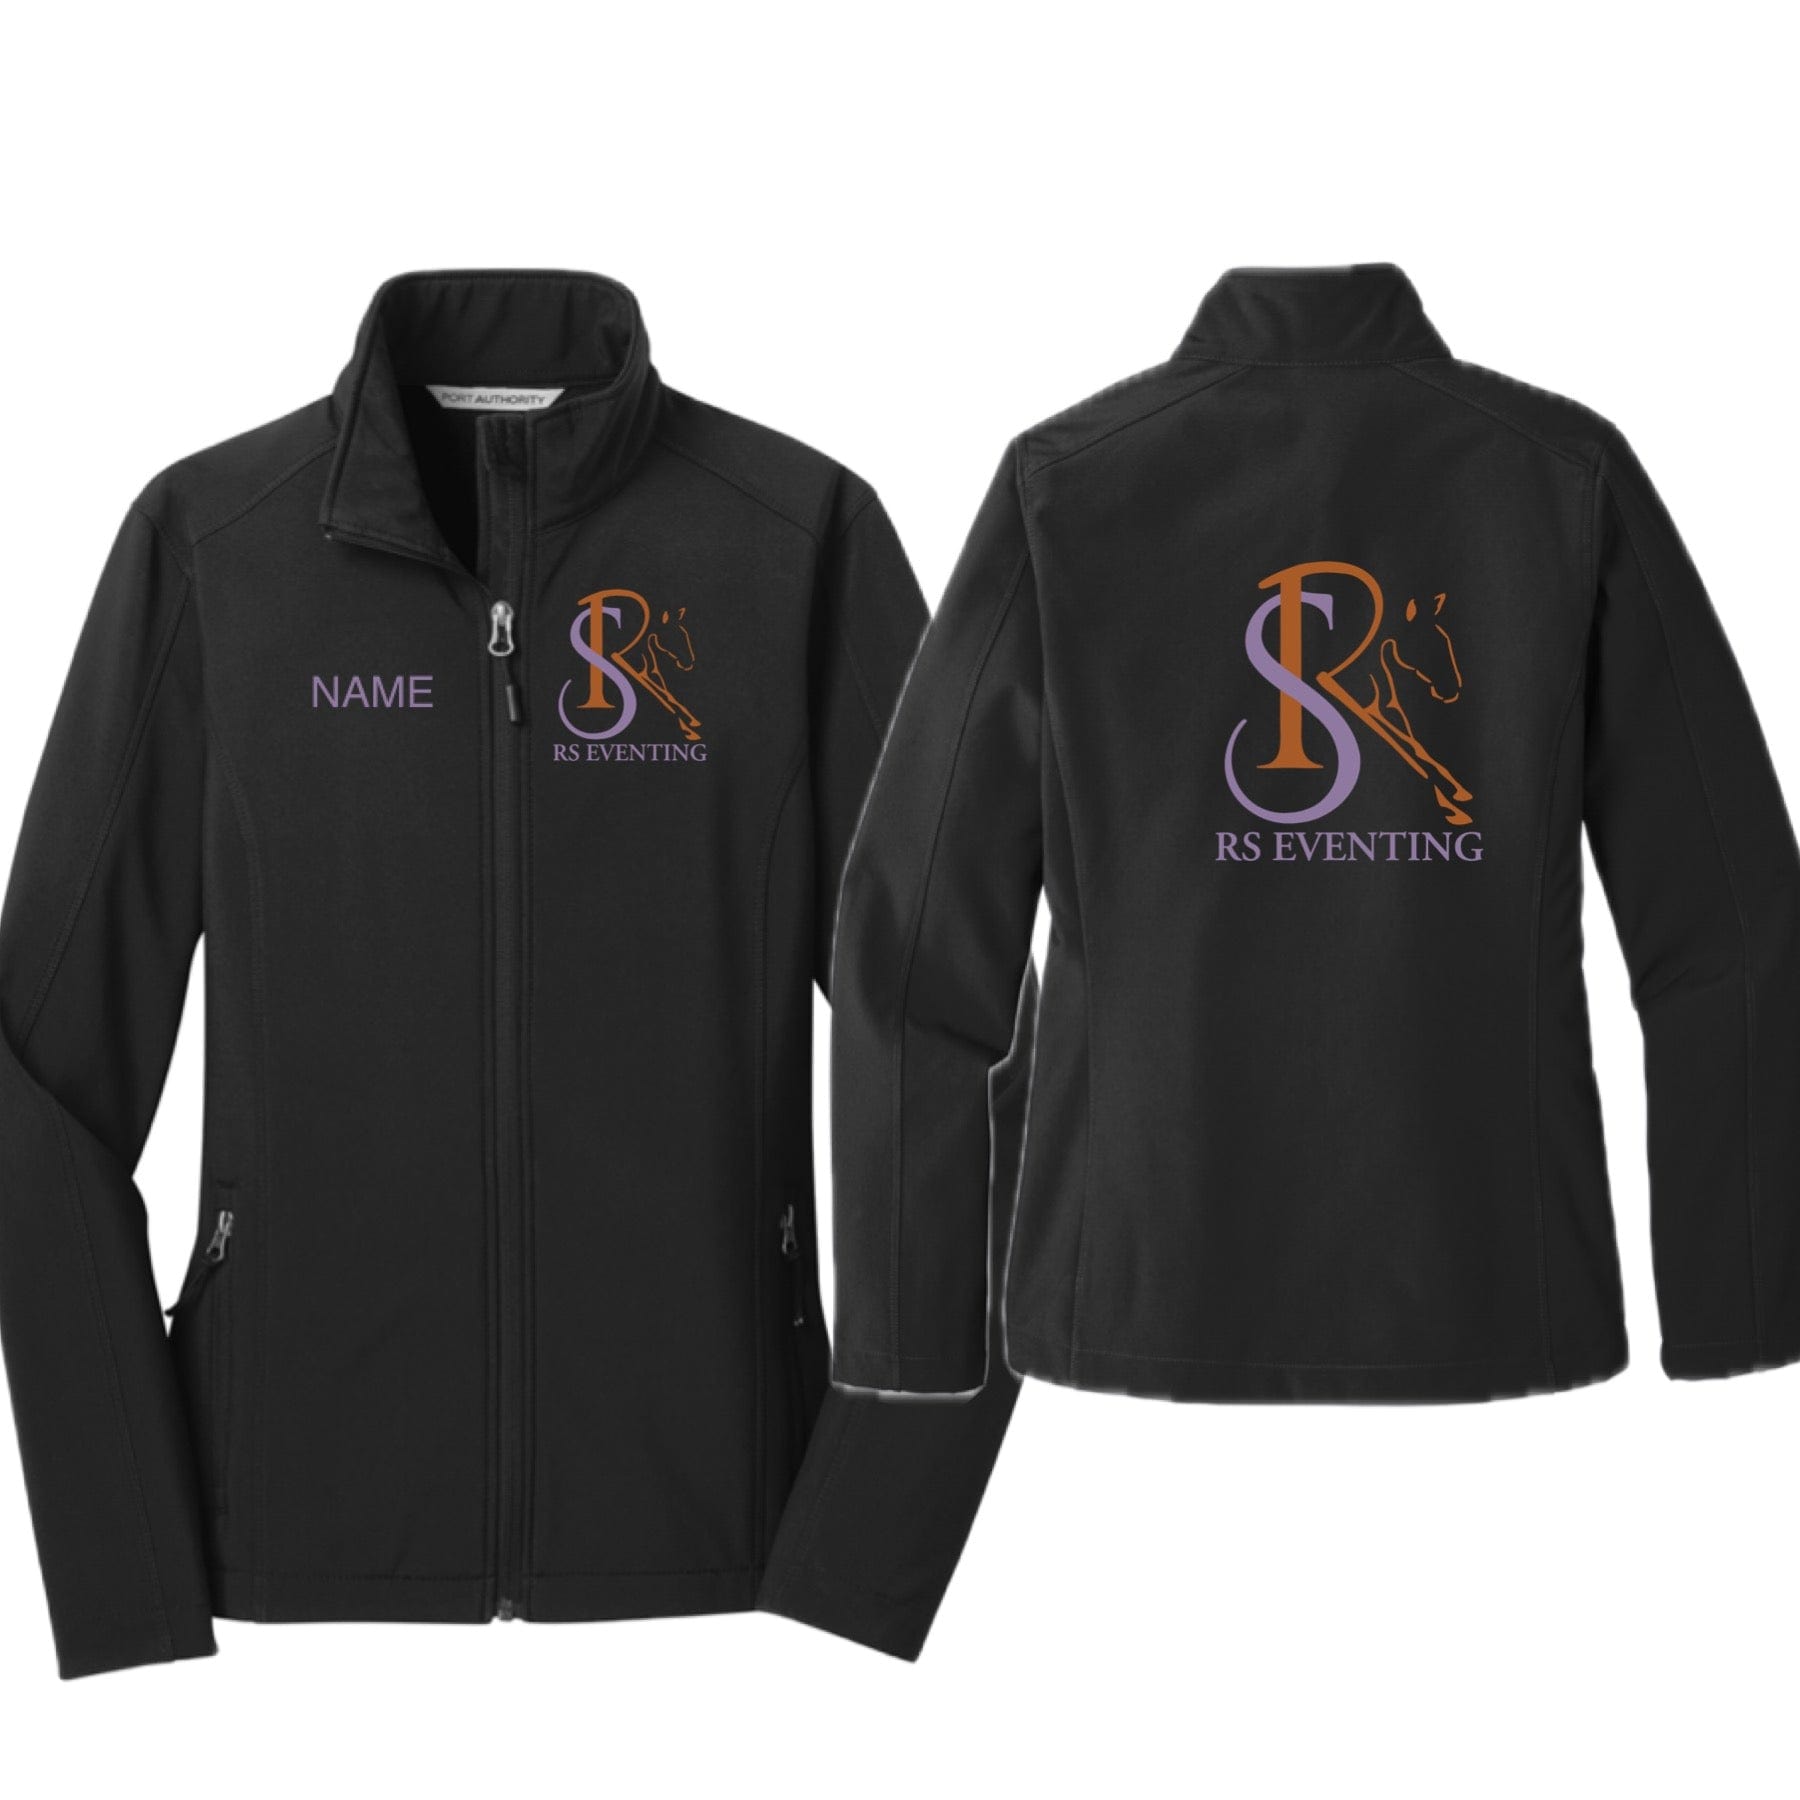 Equestrian Team Apparel RS Eventing Shell Jacket and Vest equestrian team apparel online tack store mobile tack store custom farm apparel custom show stable clothing equestrian lifestyle horse show clothing riding clothes horses equestrian tack store